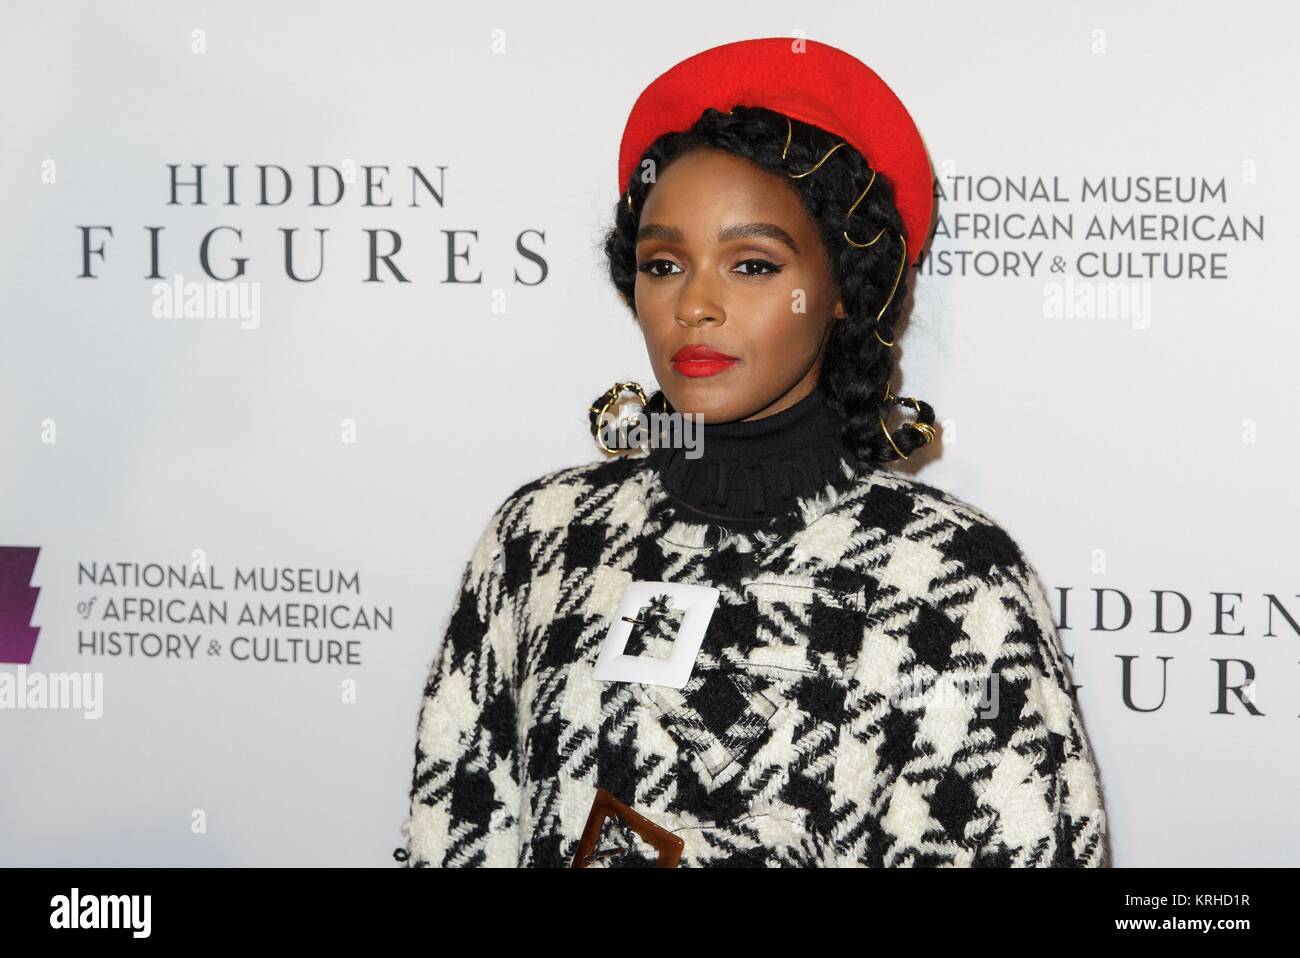 Actress and model Janelle Monae walks the red carpet during a screening of the film Hidden Figures at the Smithsonian National Museum of African American History and Culture December 14, 2016 in Washington, DC. The film is based on the lives of three African-American mathematicians who worked for NASA during the John Glenn Friendship 7 mission in 1962. Stock Photo